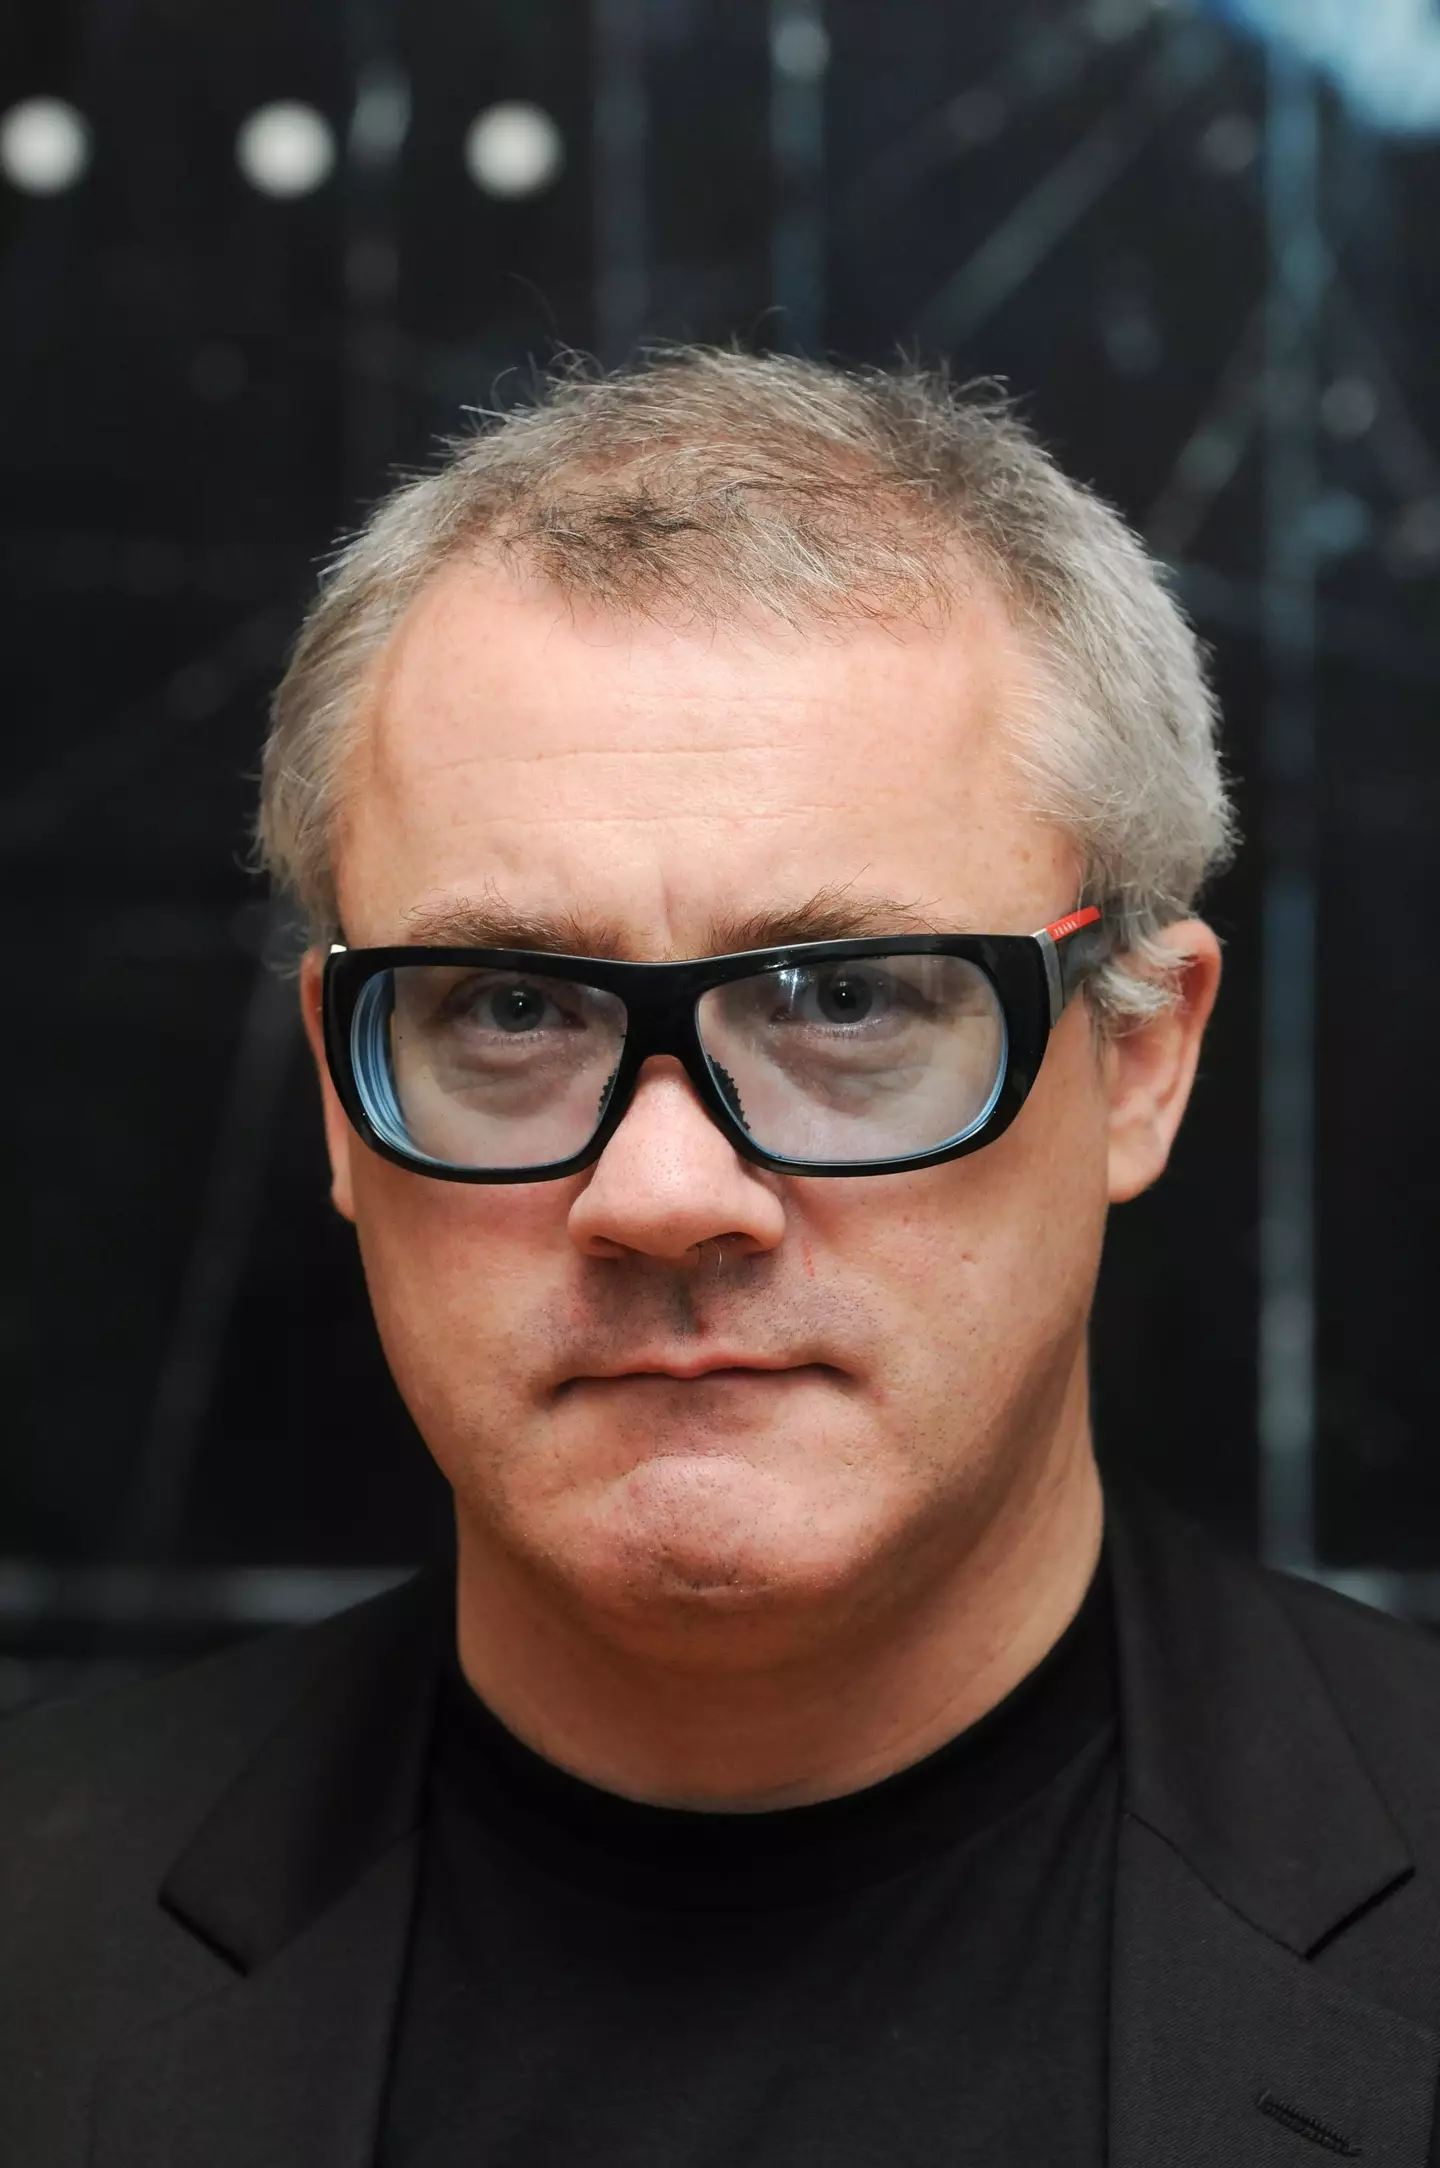 Damien Hirst created the piece back in 1990.